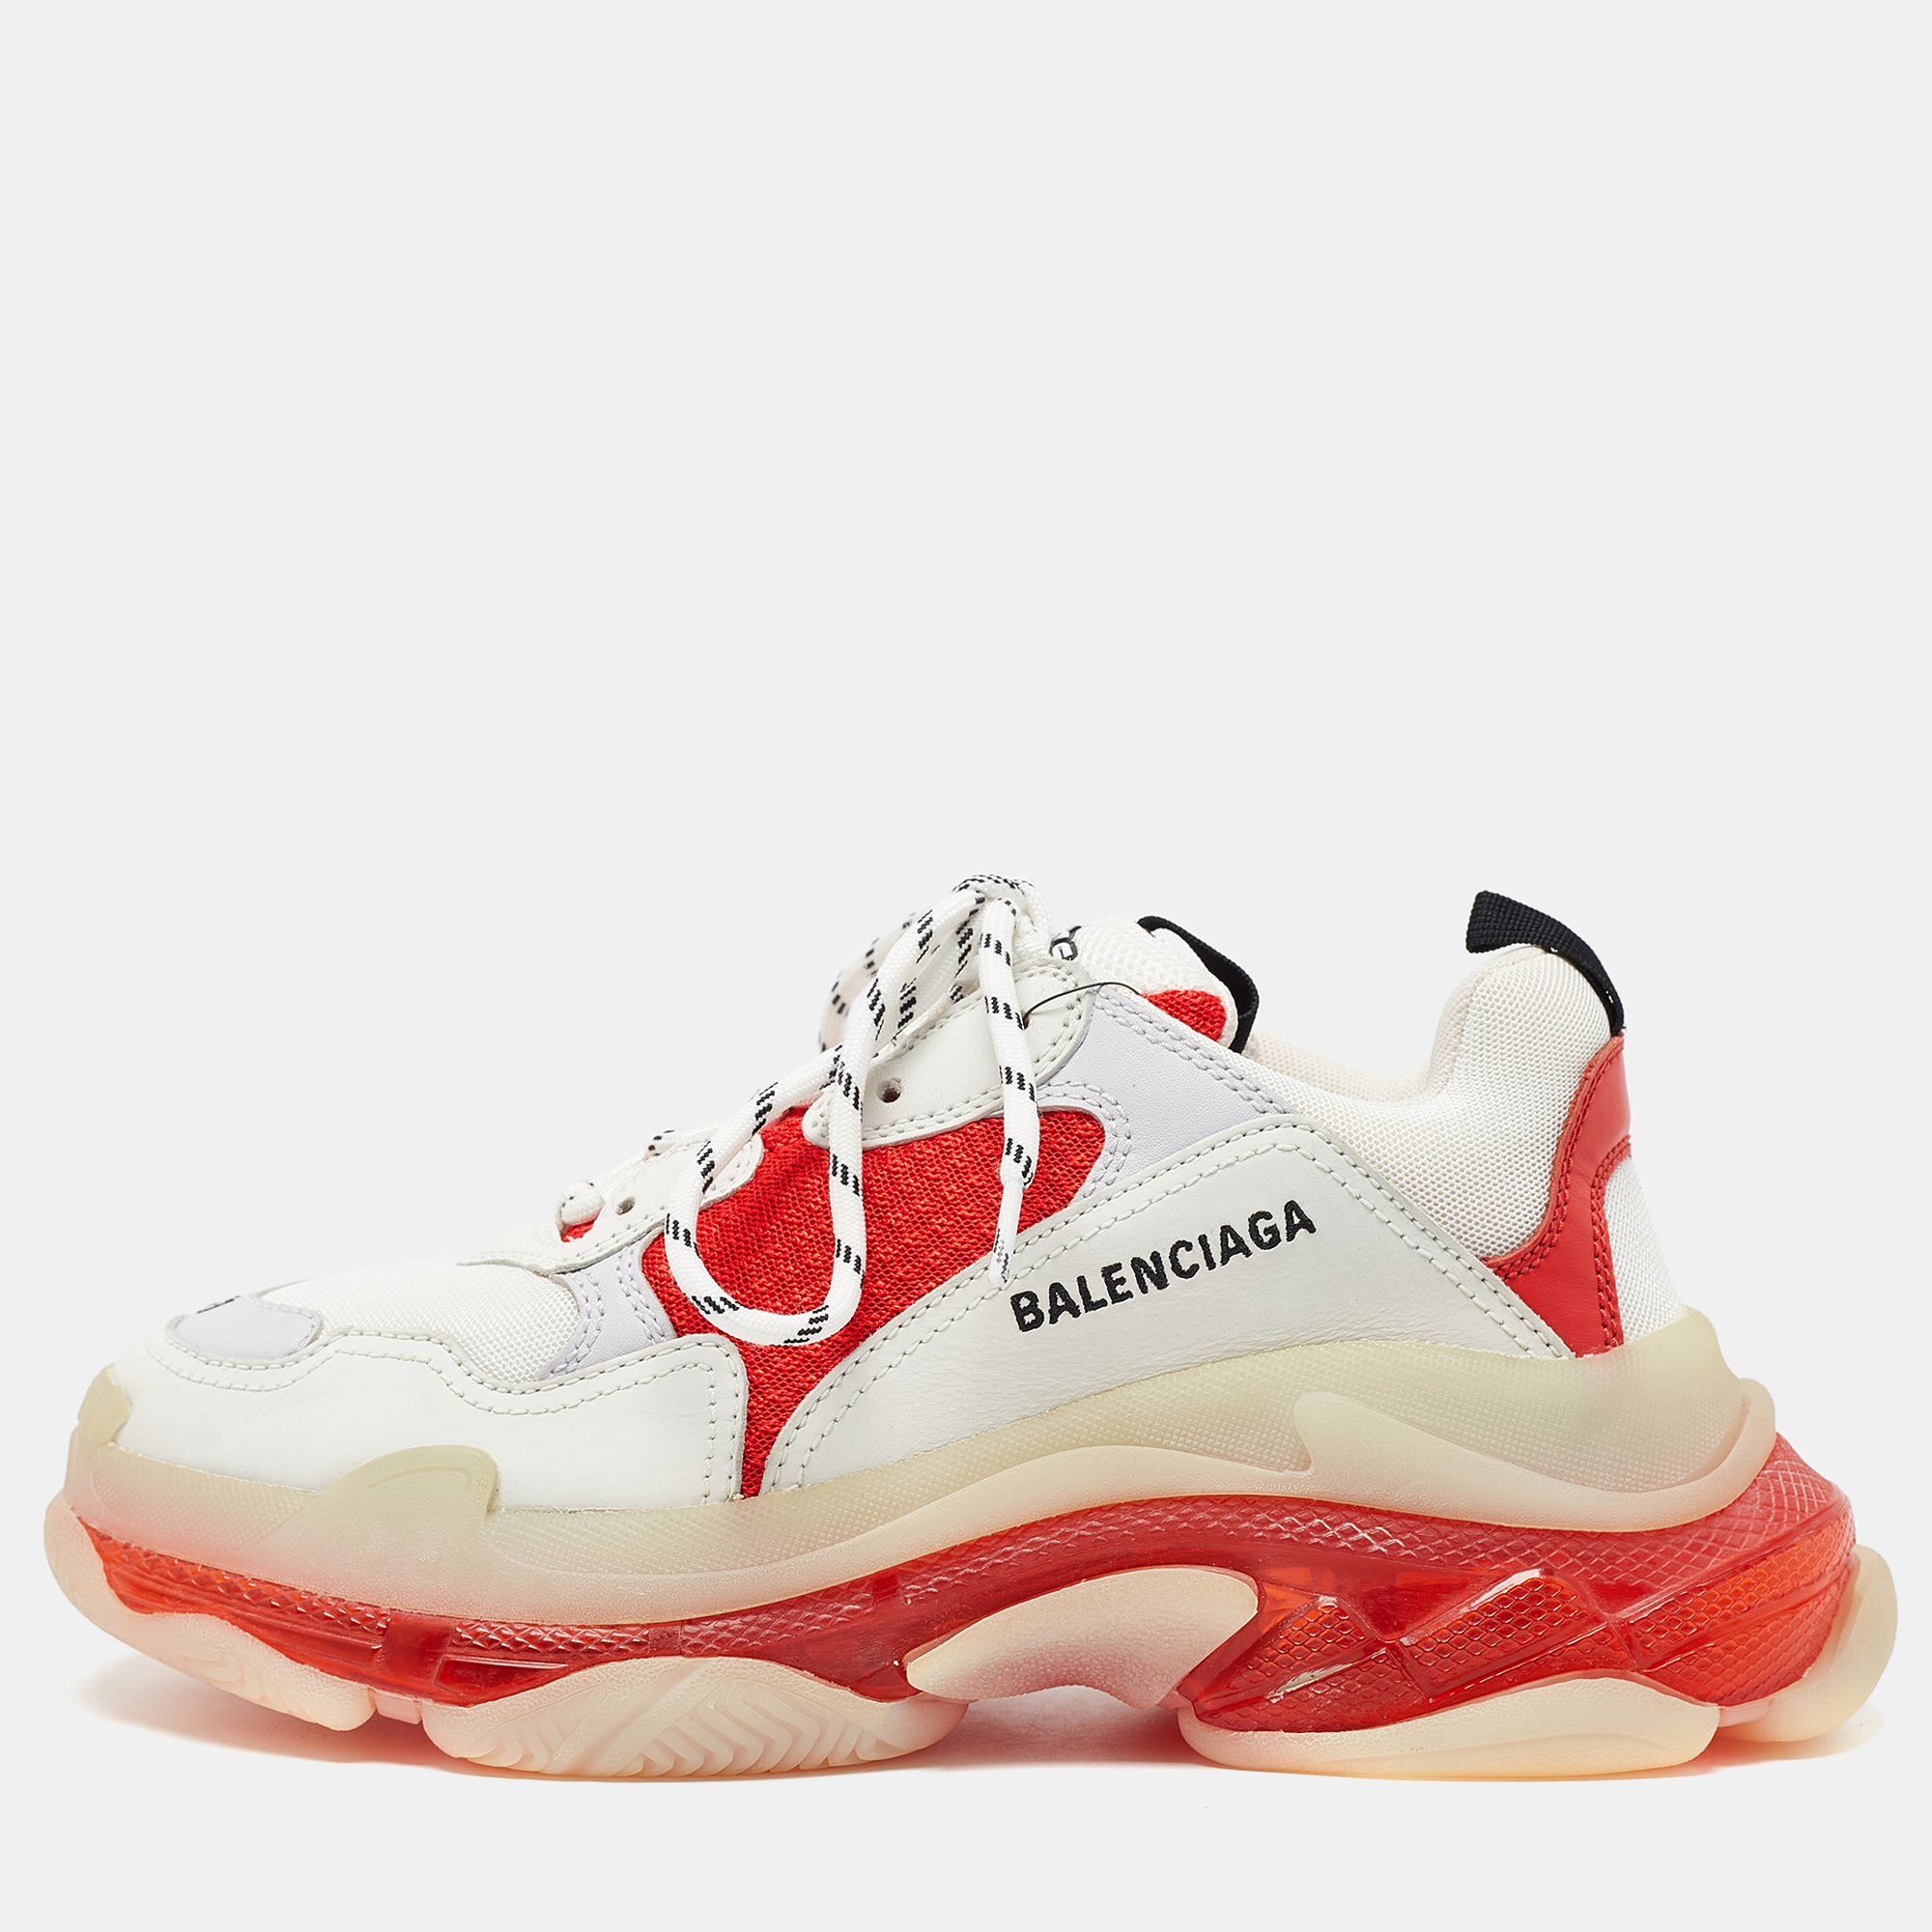 

Balenciaga White/Red Leather and Mesh Triple S Clear Sole Sneakers Size